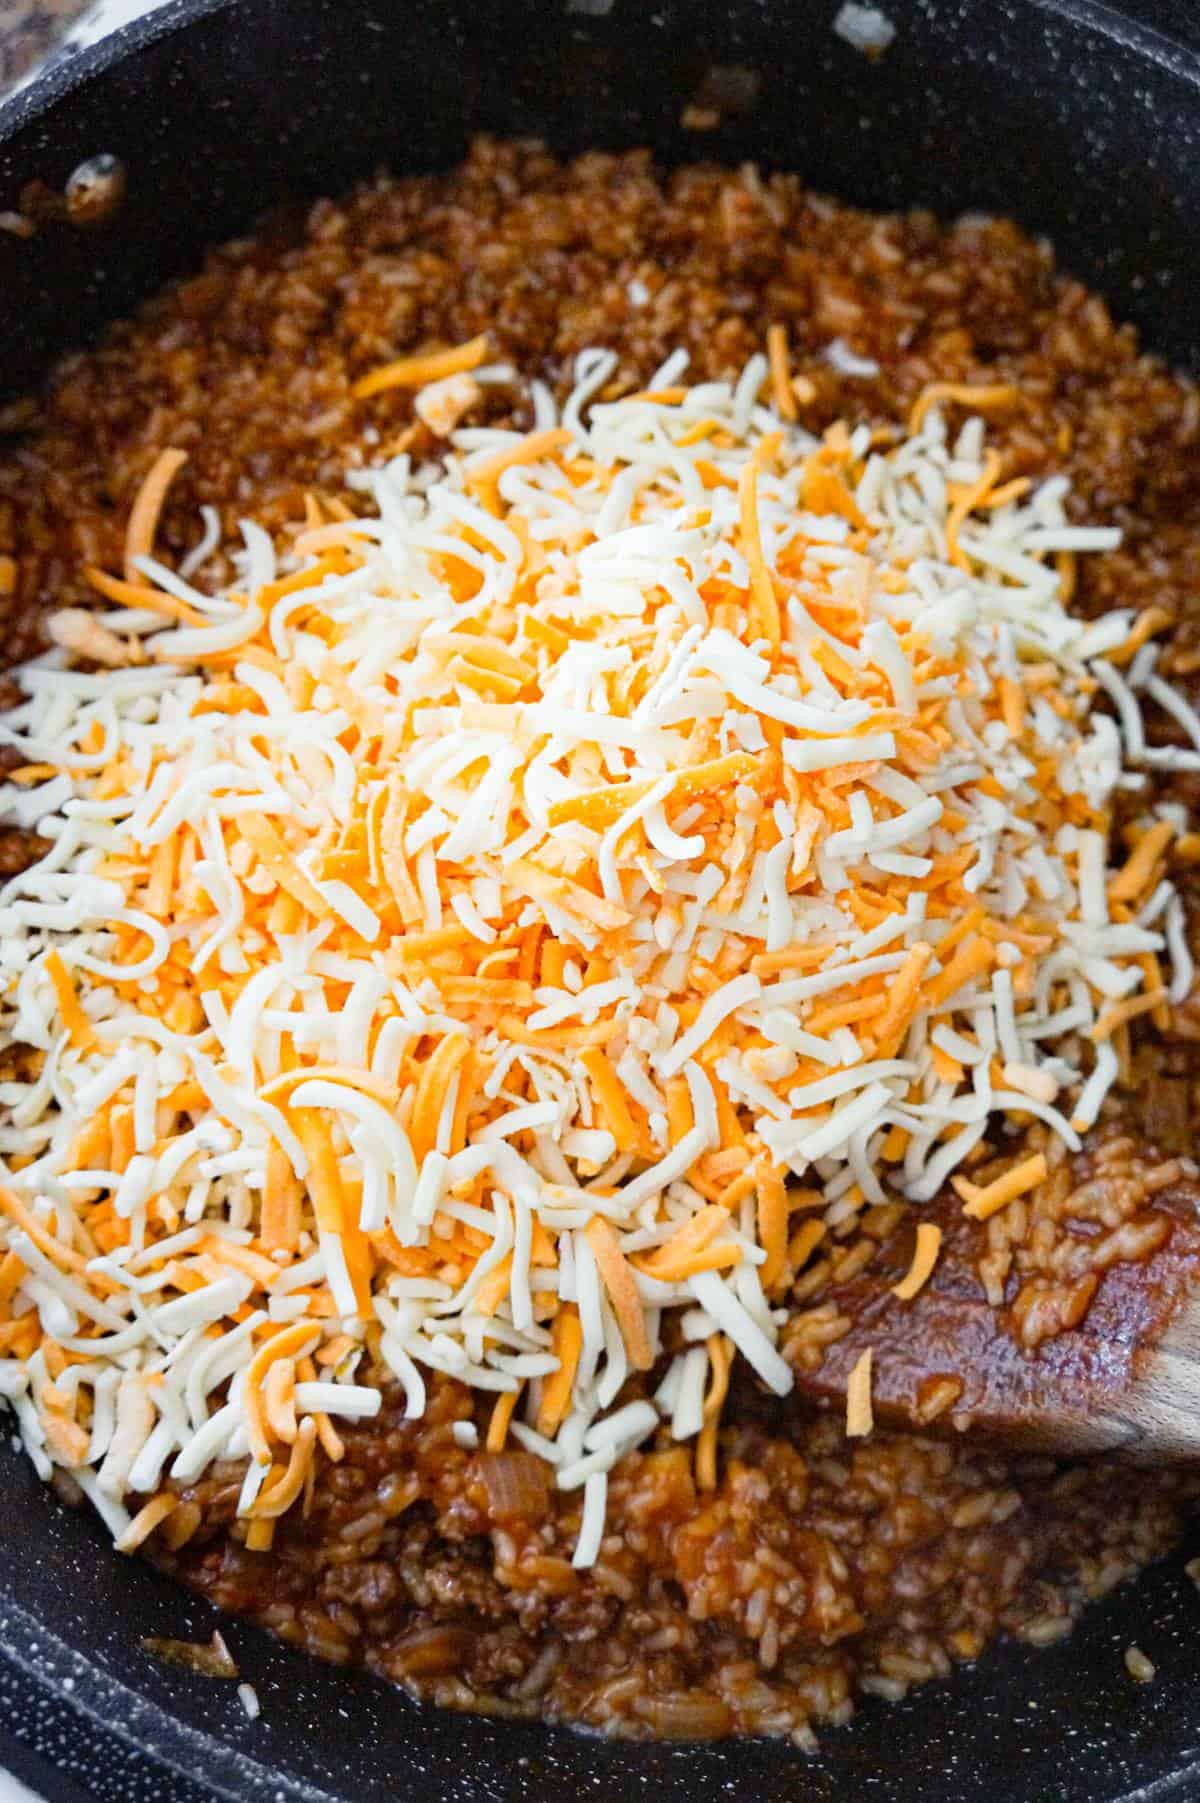 shredded mozzarella and cheddar cheese on top of ground beef and rice mixture in a saute pan